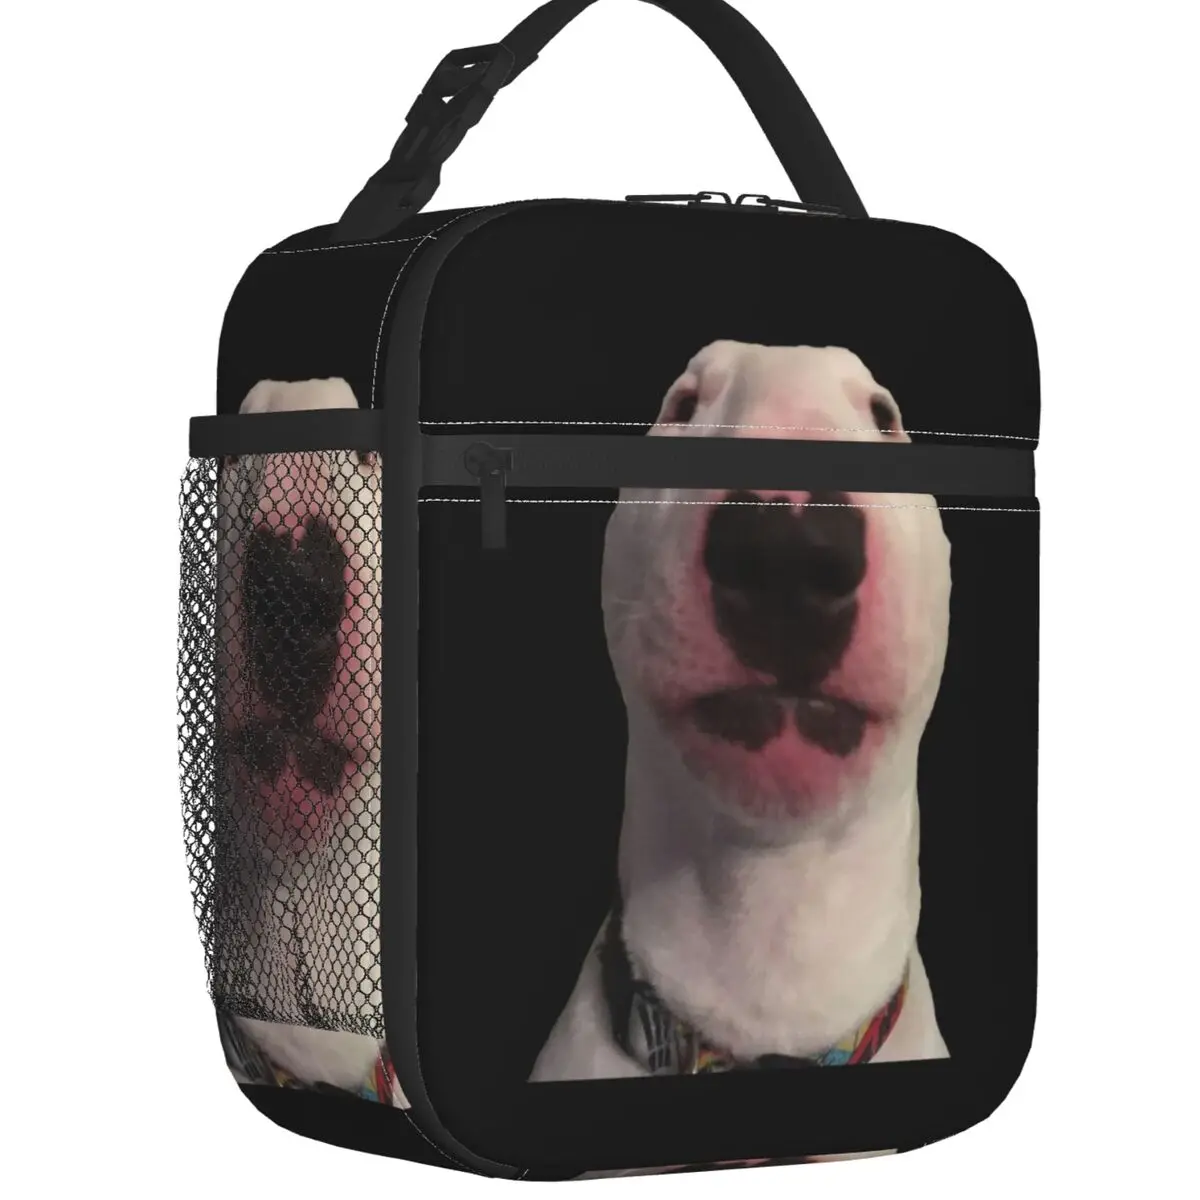 Bull Terrier Dog Funny Meme Insulated Lunch Bag for Outdoor Picnic Waterproof Thermal Cooler Bento Box Women Kids